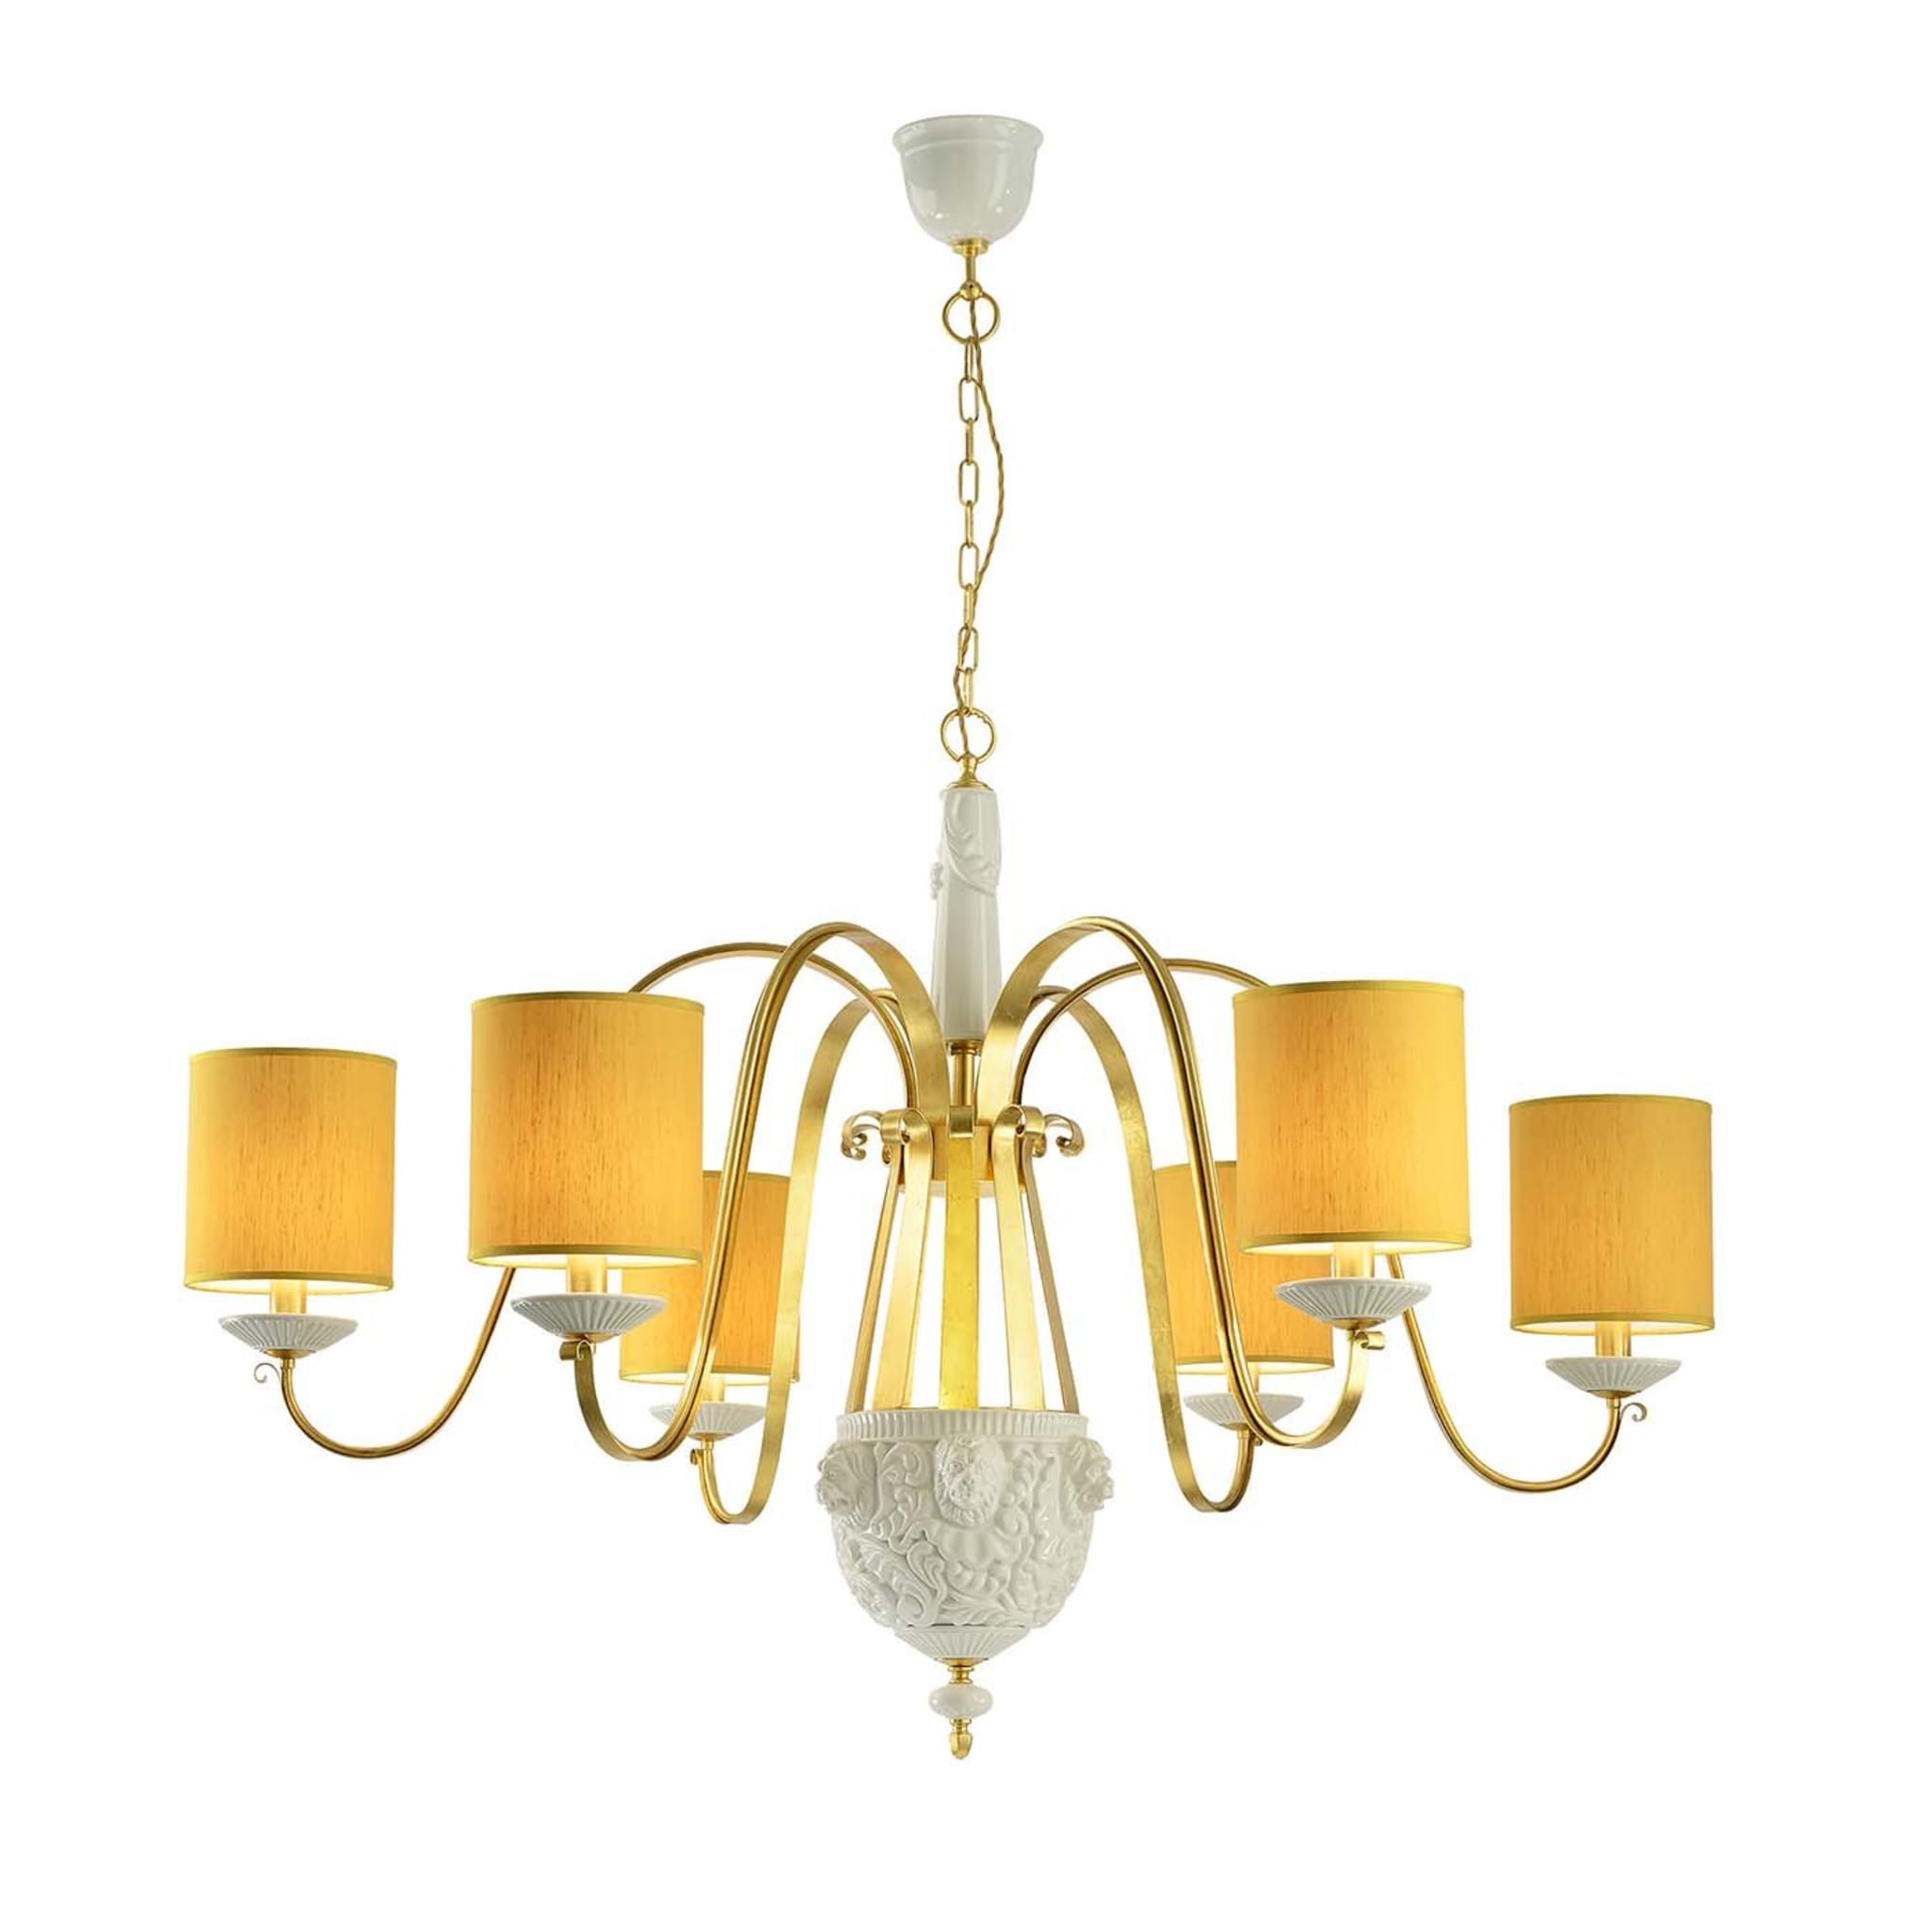 Principe 6-Light Chandelier by Salvatore Spataro and Paolo Barboni - Main view